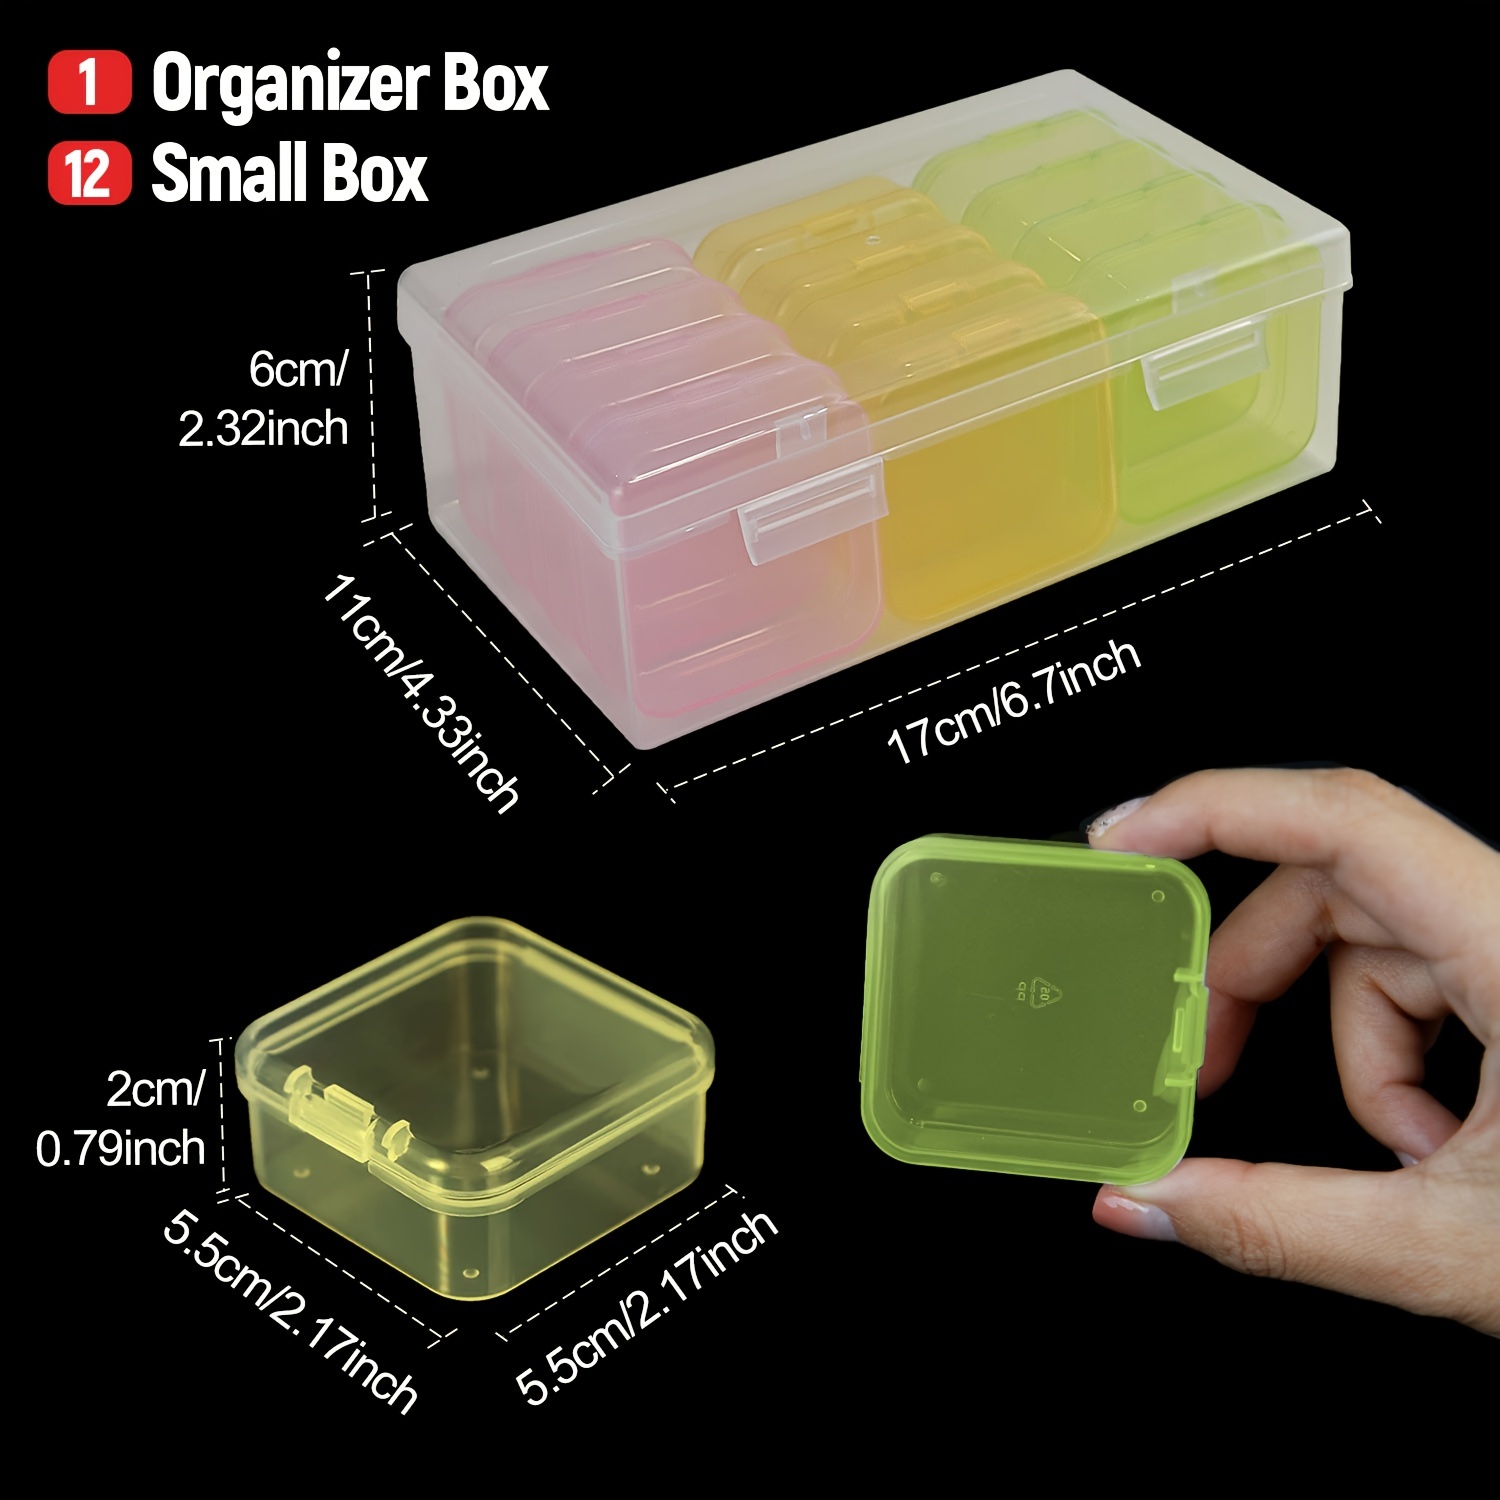 Mr. Pen- Small Plastic Containers, Clear, 12 pcs, Small Bead Organizer,  Small Containers for Organizing, Bead Containers, Small Plastic Box, Mini